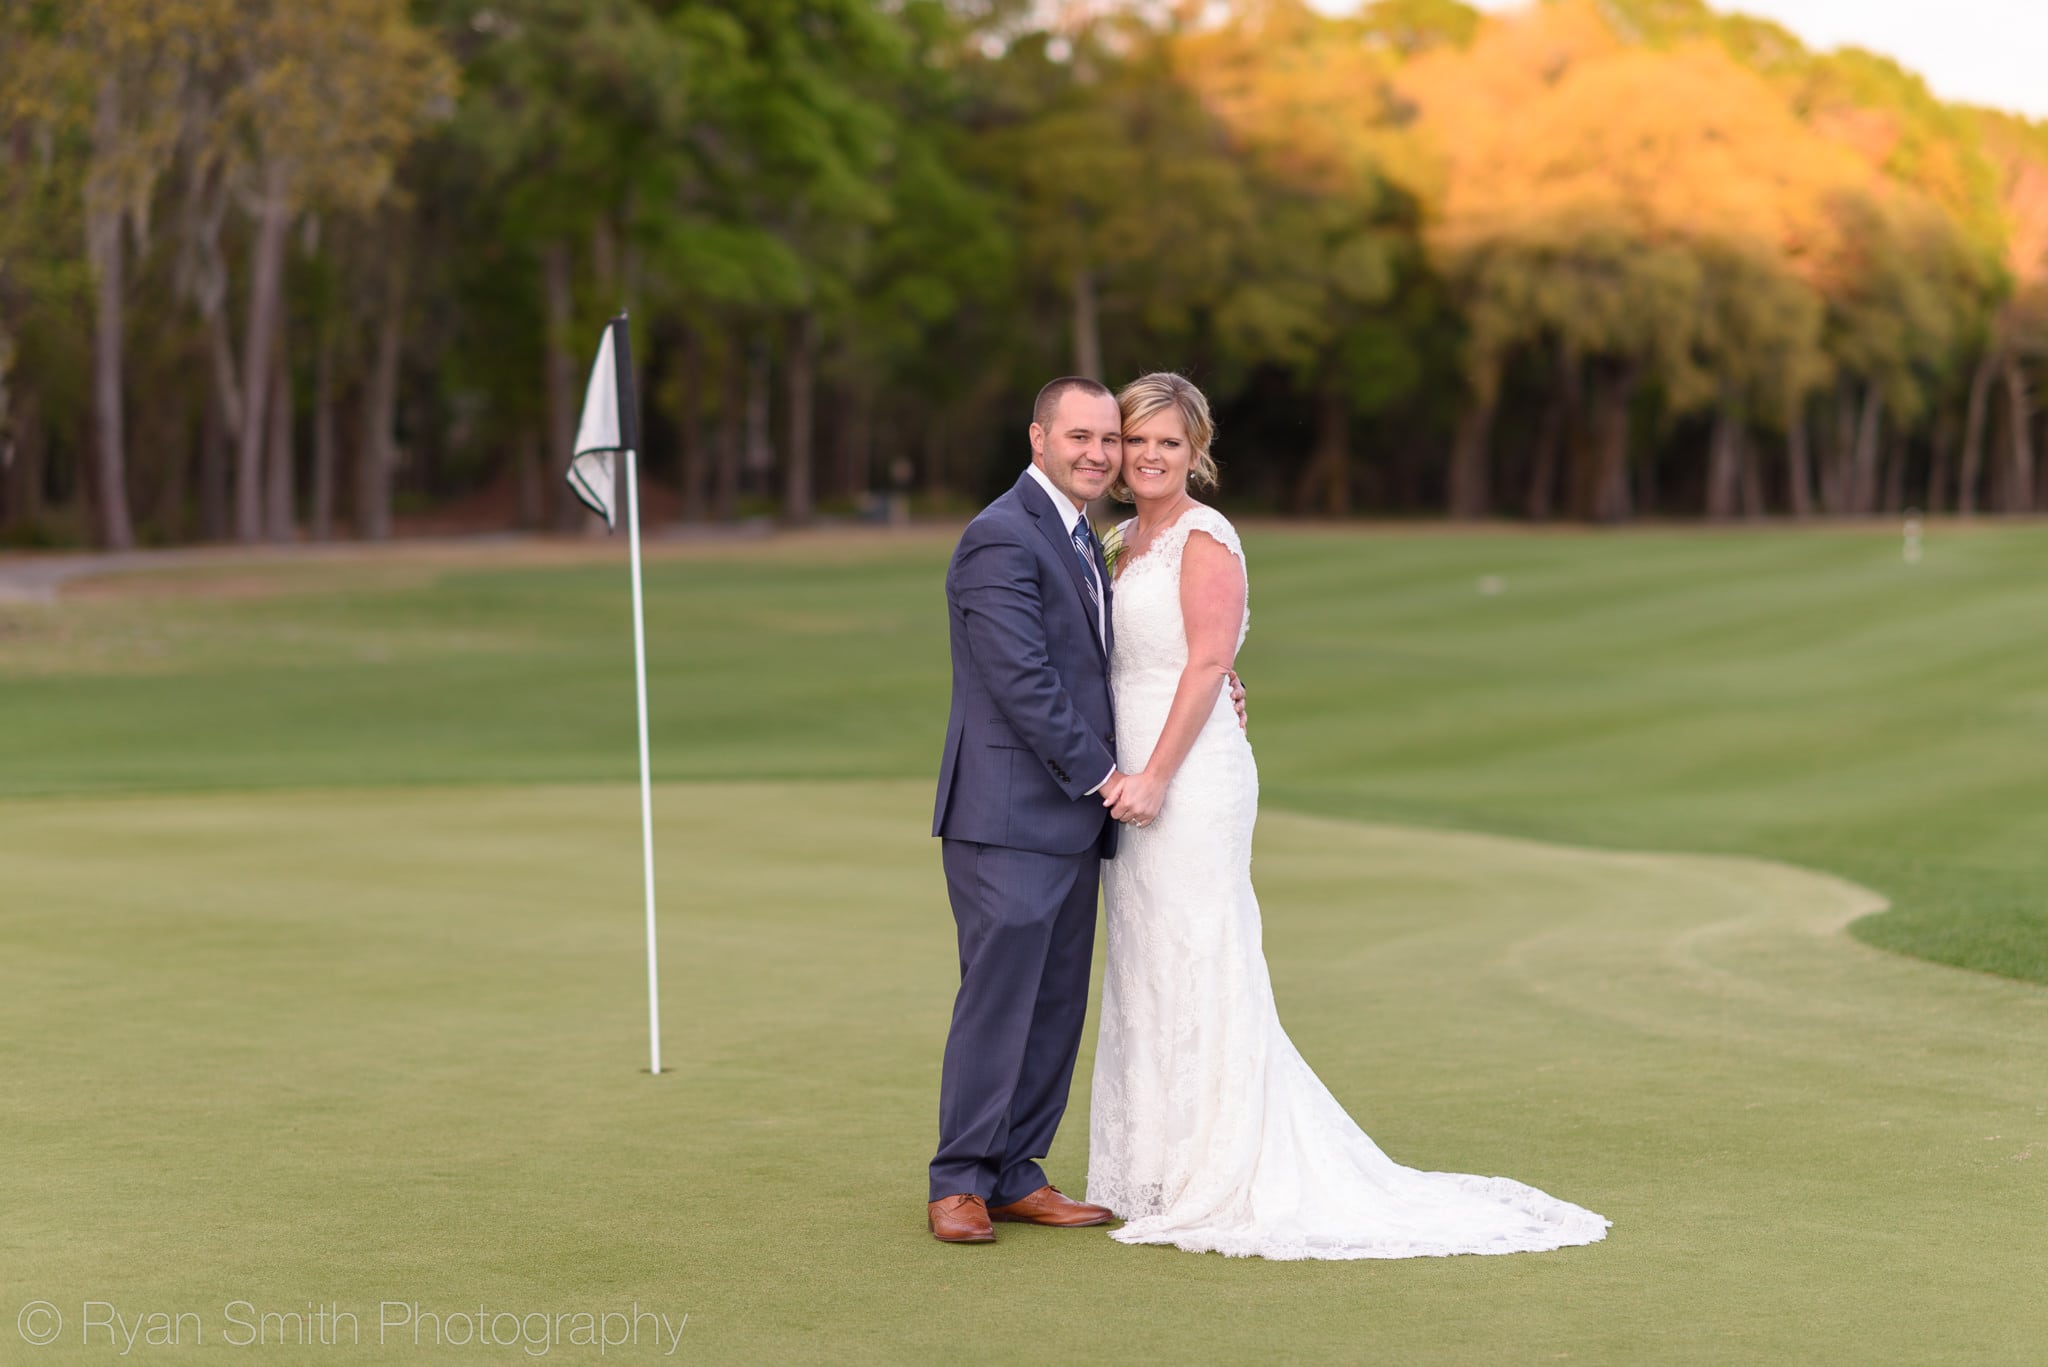 Kiss in front of the golf tee - Pawleys Plantation